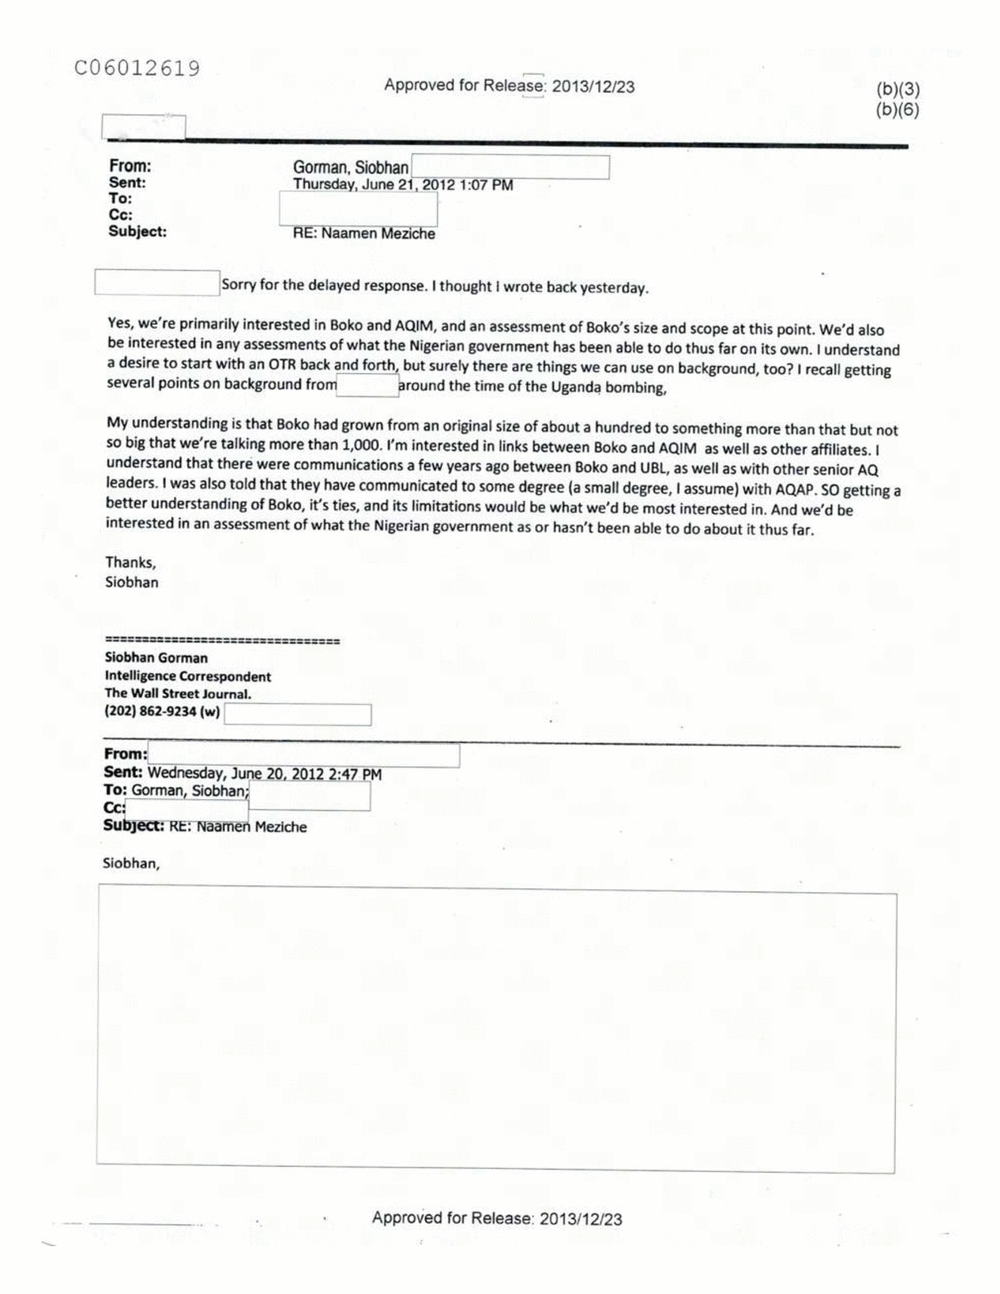 Page 167 from Email Correspondence Between Reporters and CIA Flacks